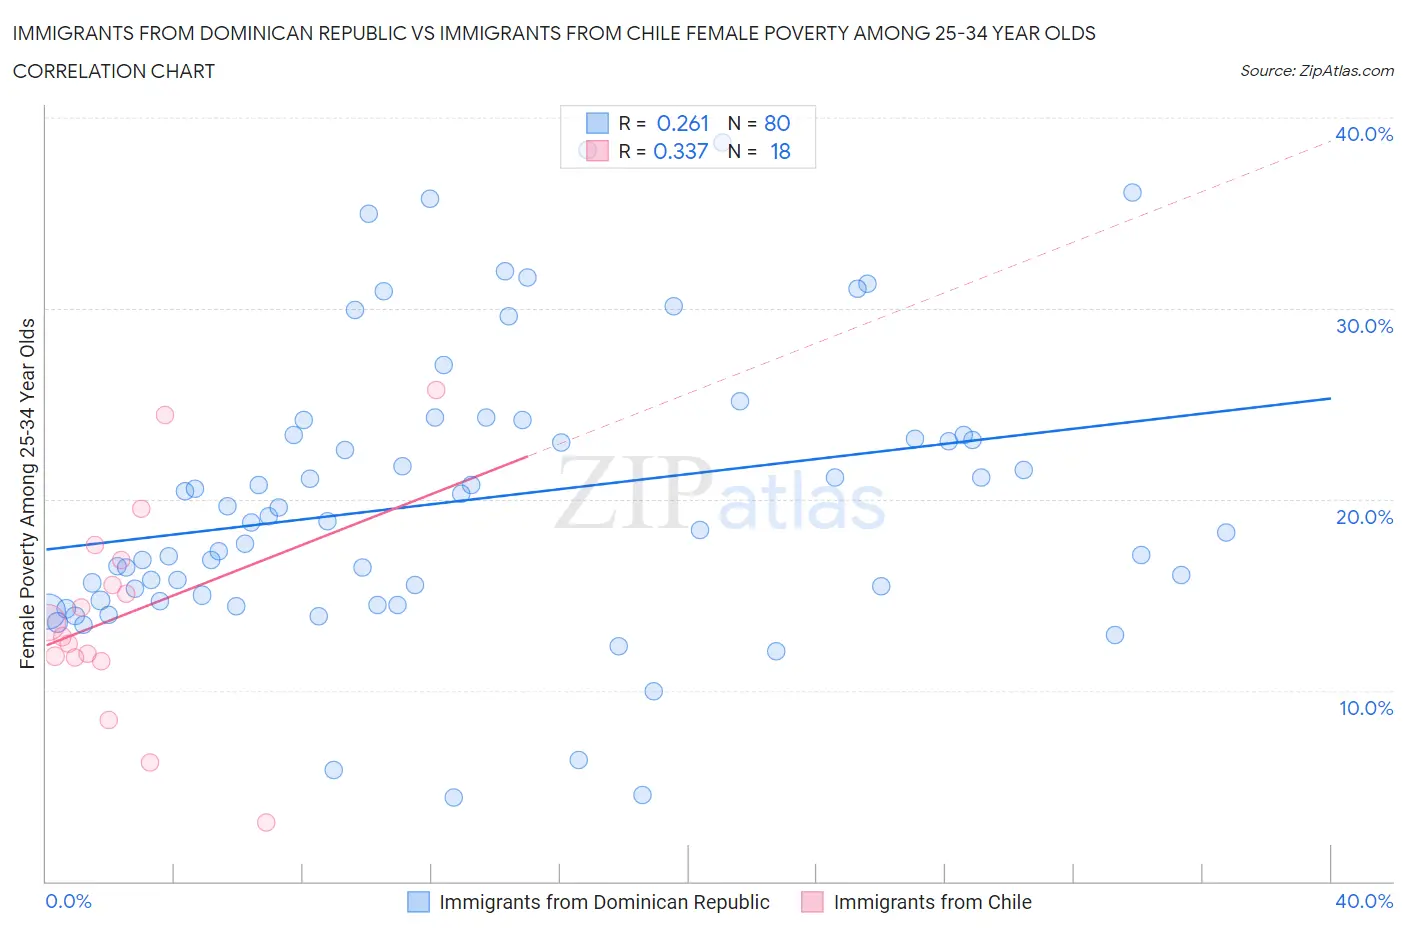 Immigrants from Dominican Republic vs Immigrants from Chile Female Poverty Among 25-34 Year Olds